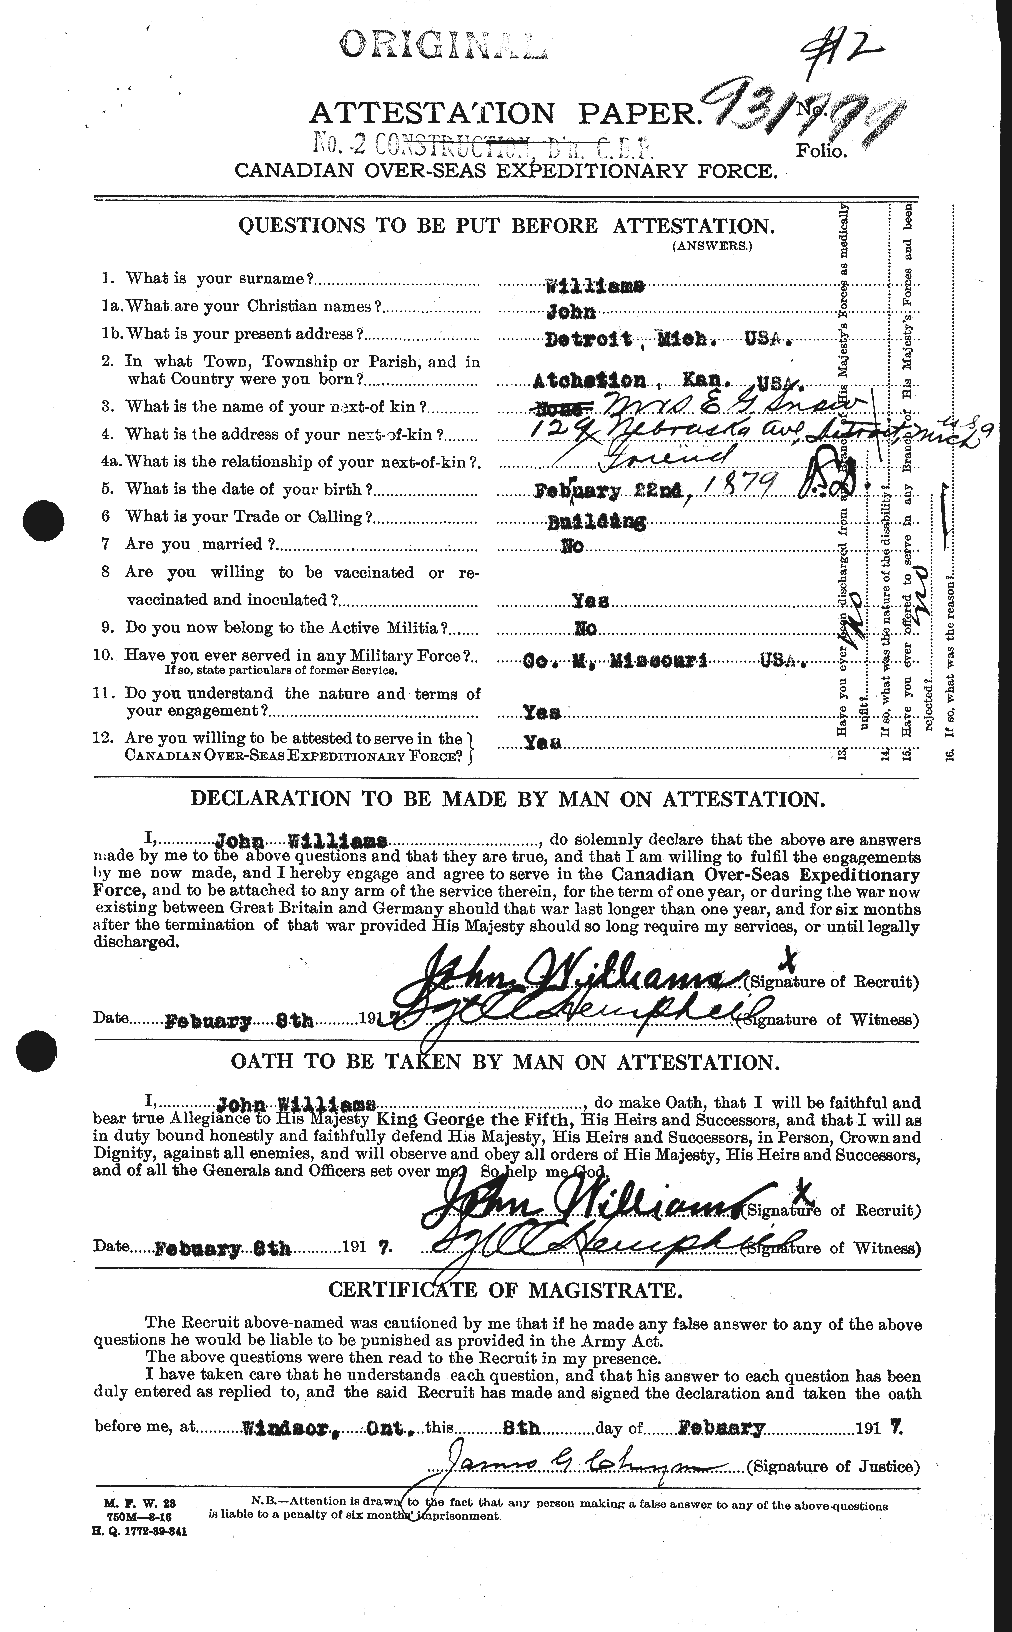 Personnel Records of the First World War - CEF 672960a